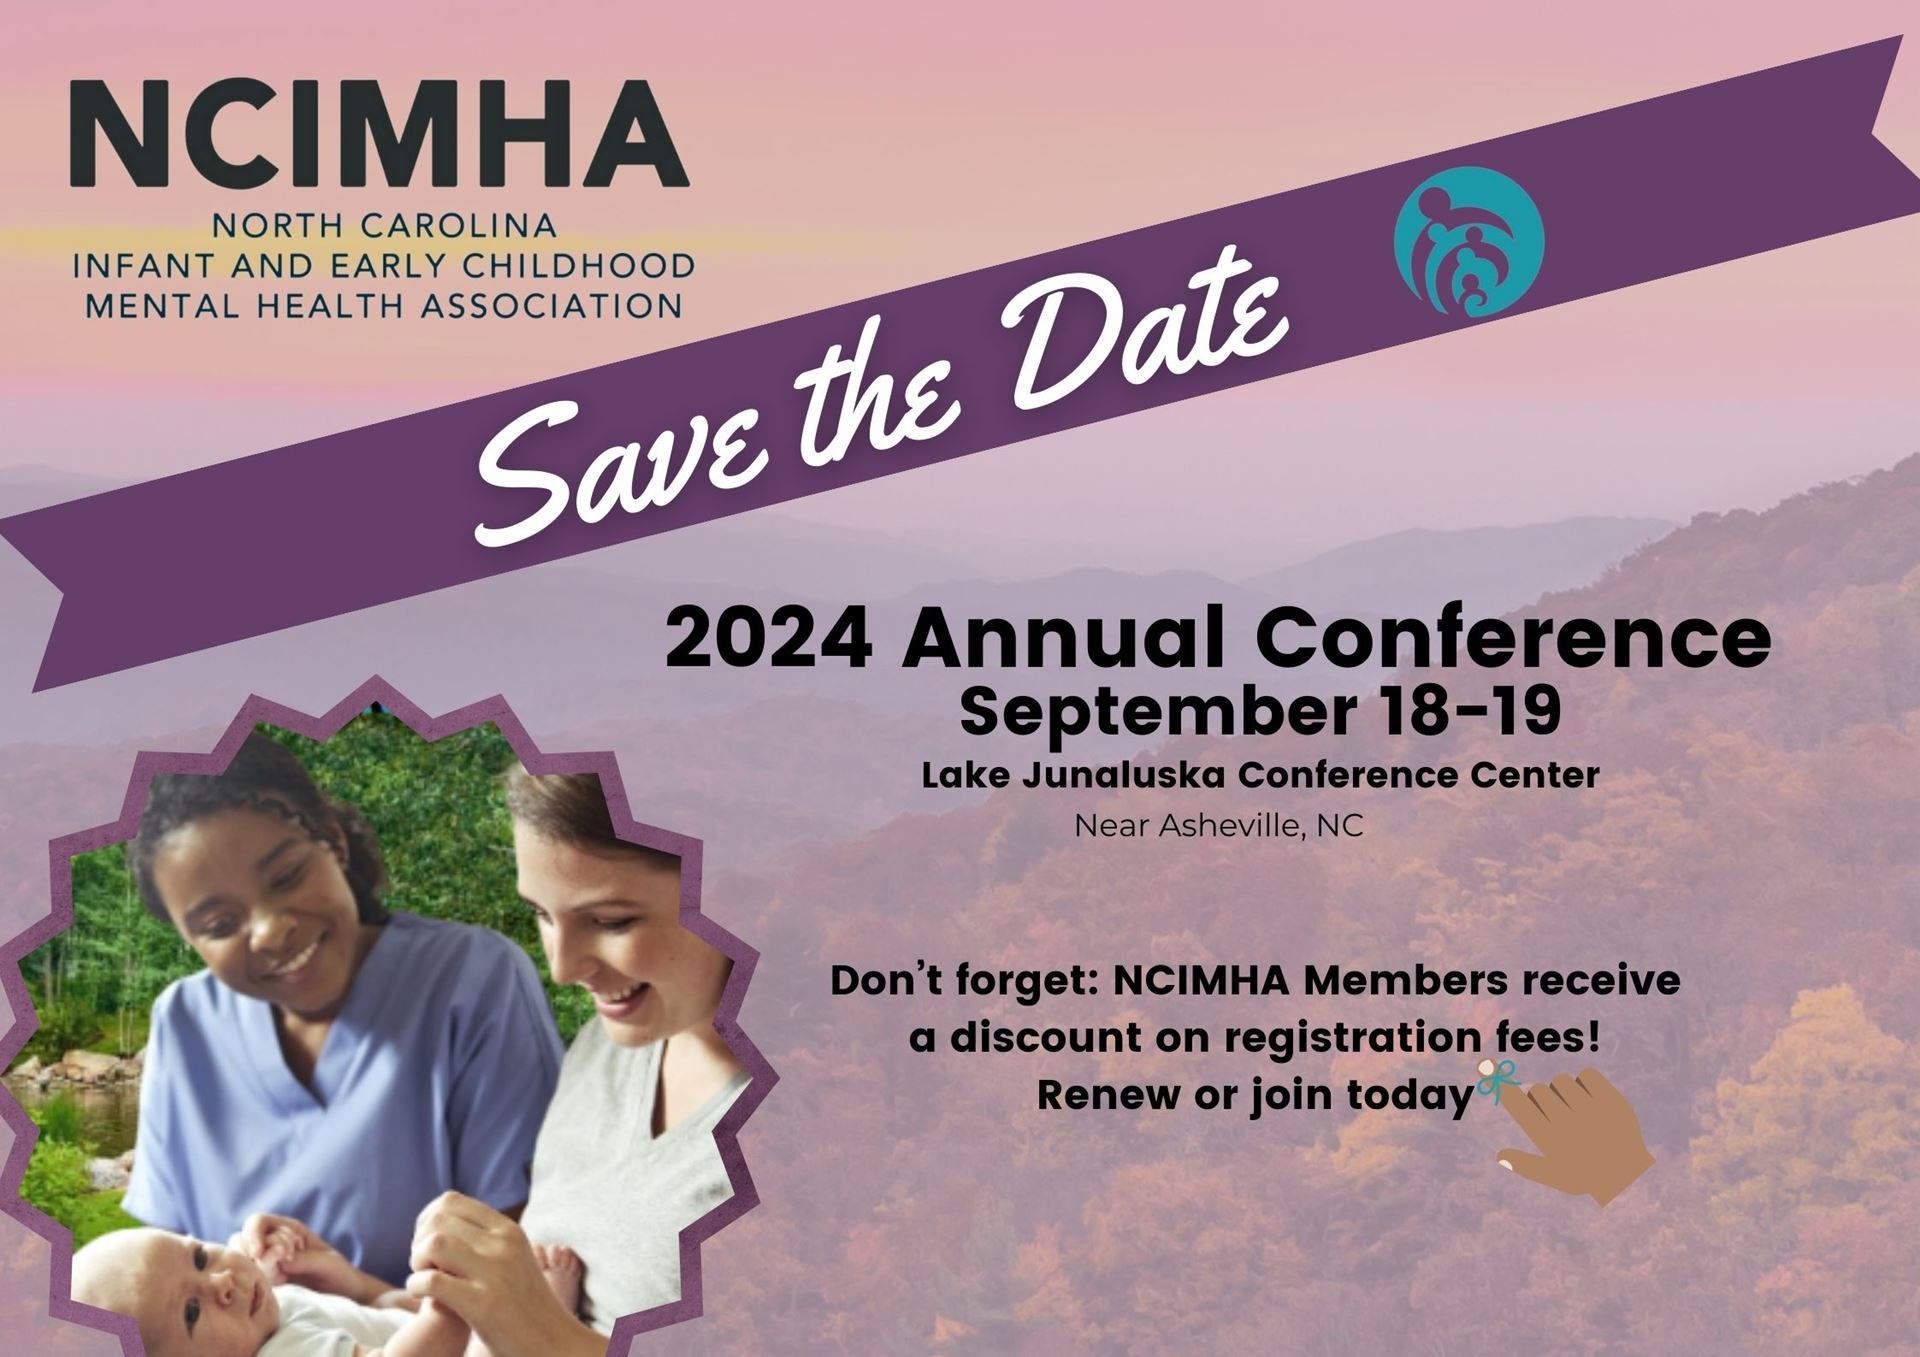 Save the date for the 2024 Annual Conferences on September 18 - 19 at Lake Junaluska Conference Center in Asheville, NC.